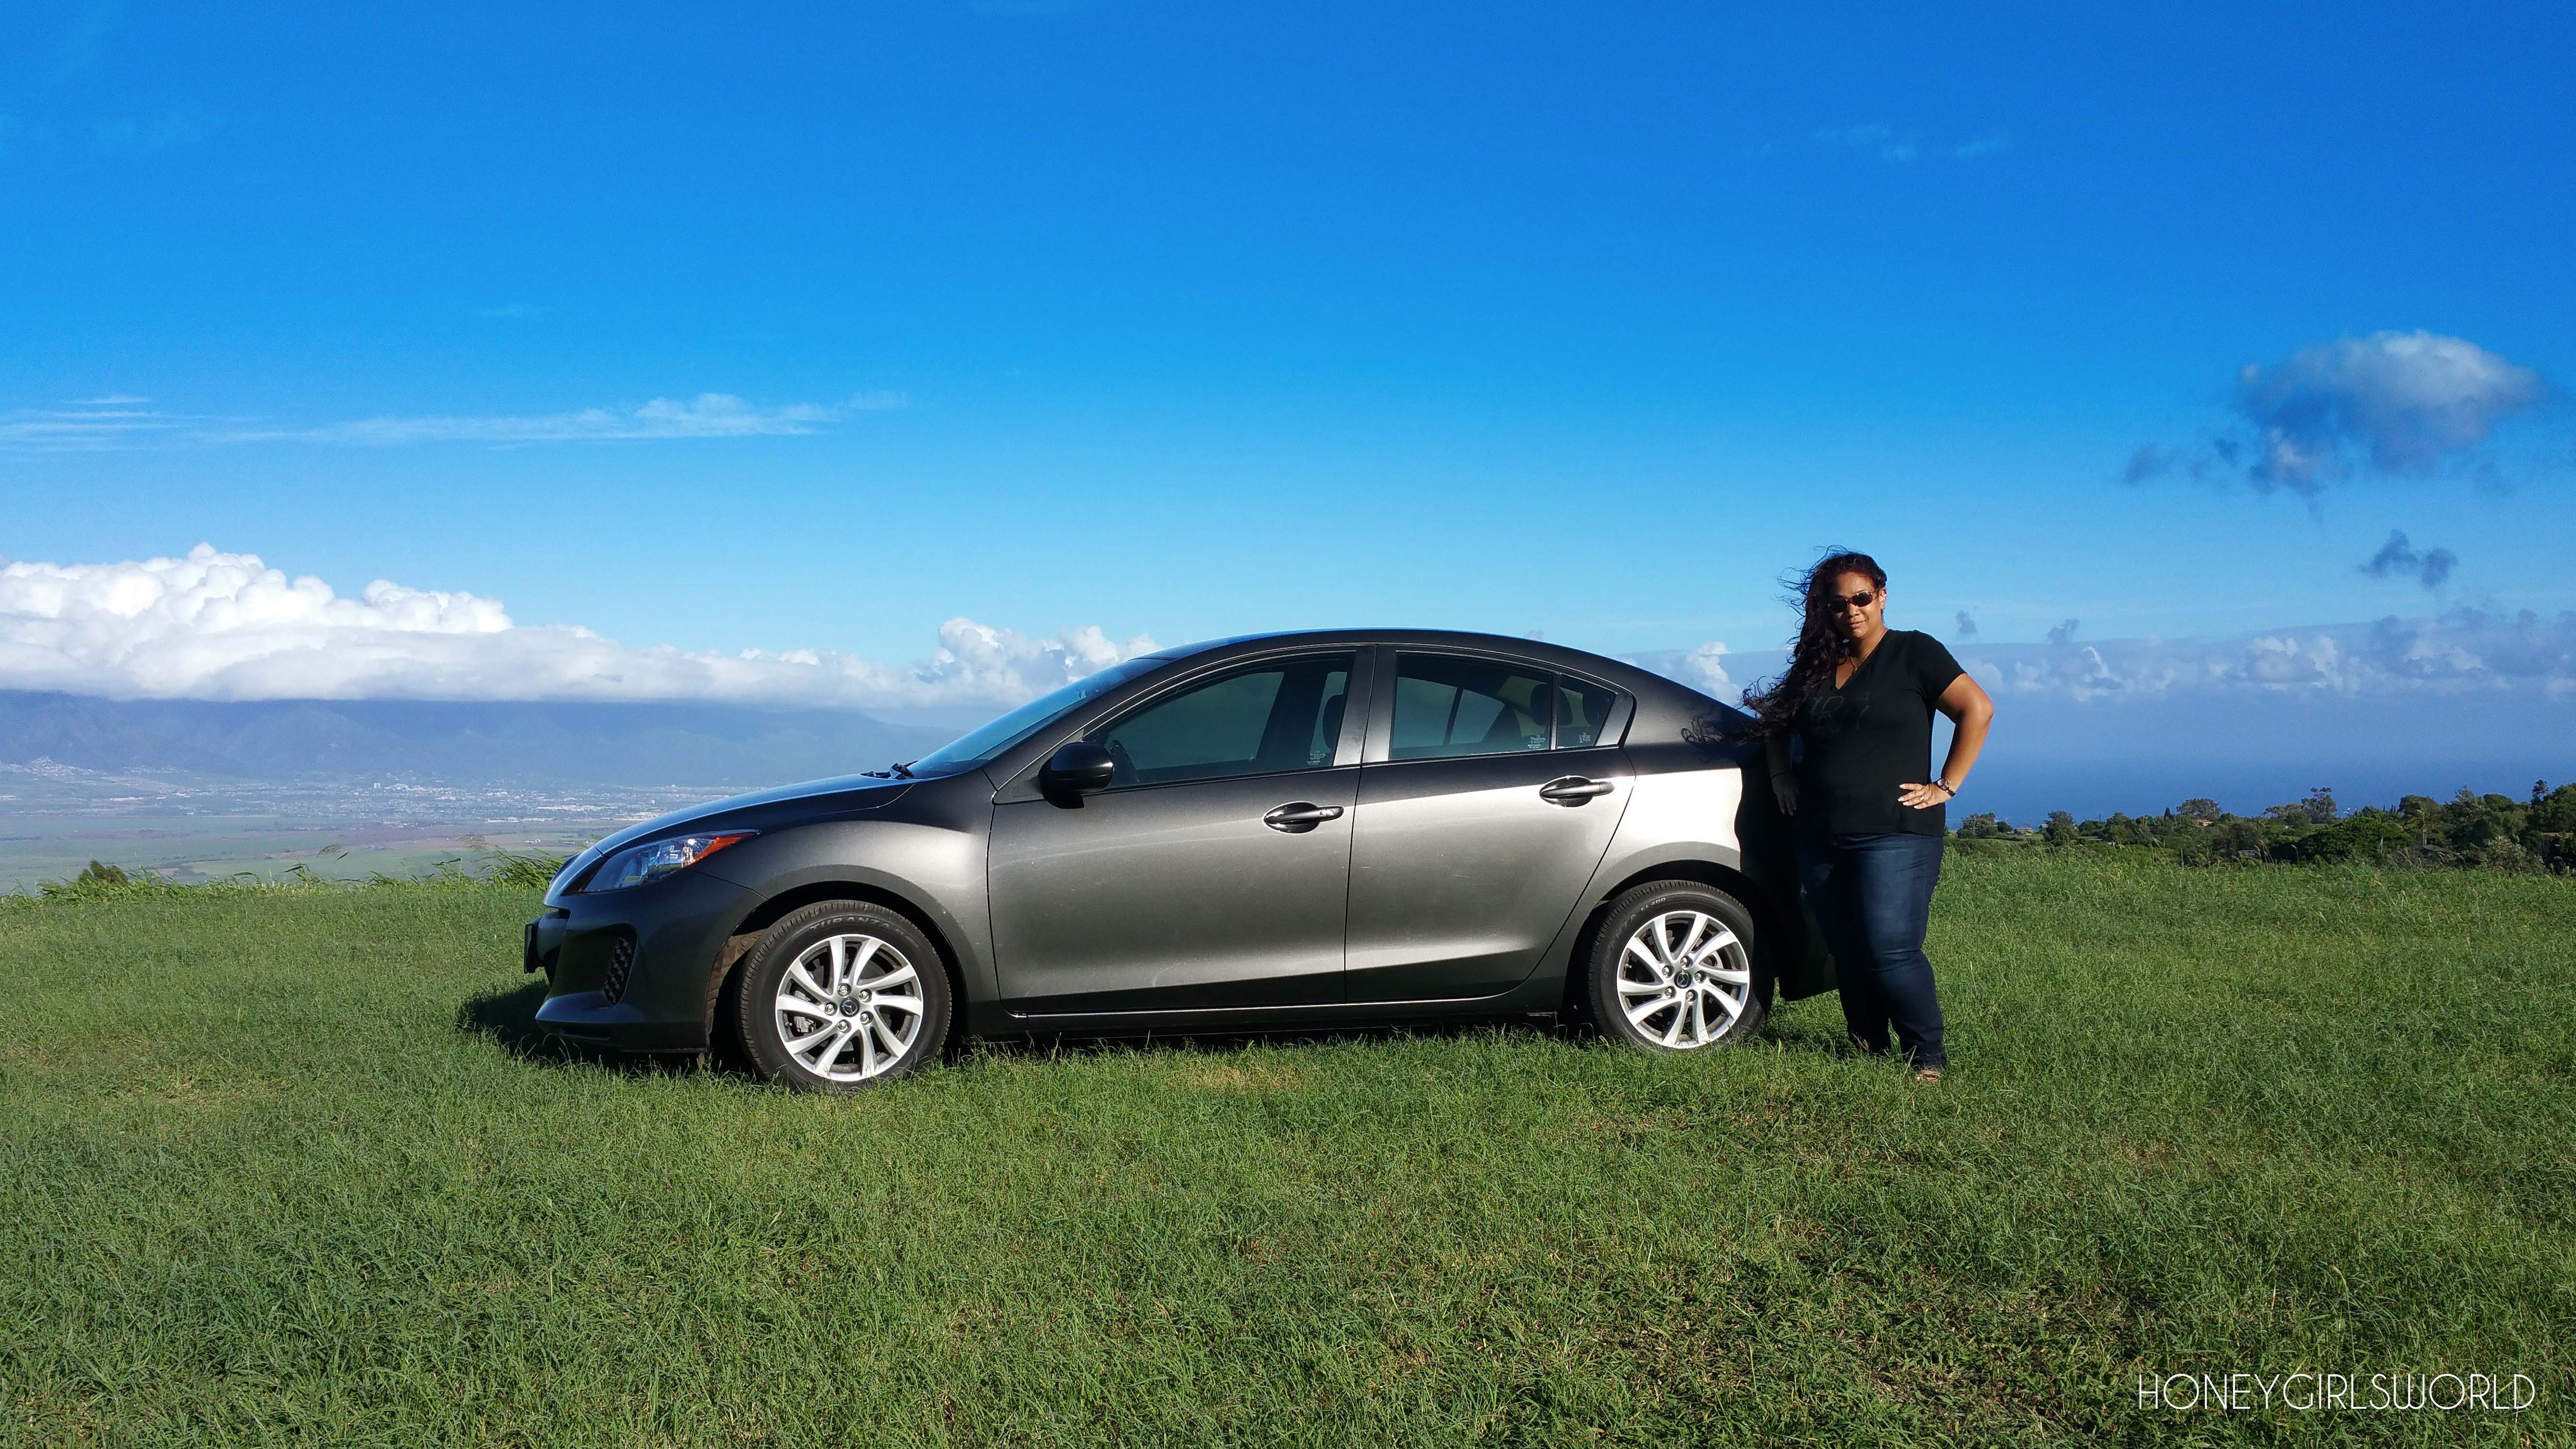 From a Large Car to a Compact - Buying a Car With Aloha Kia Maui